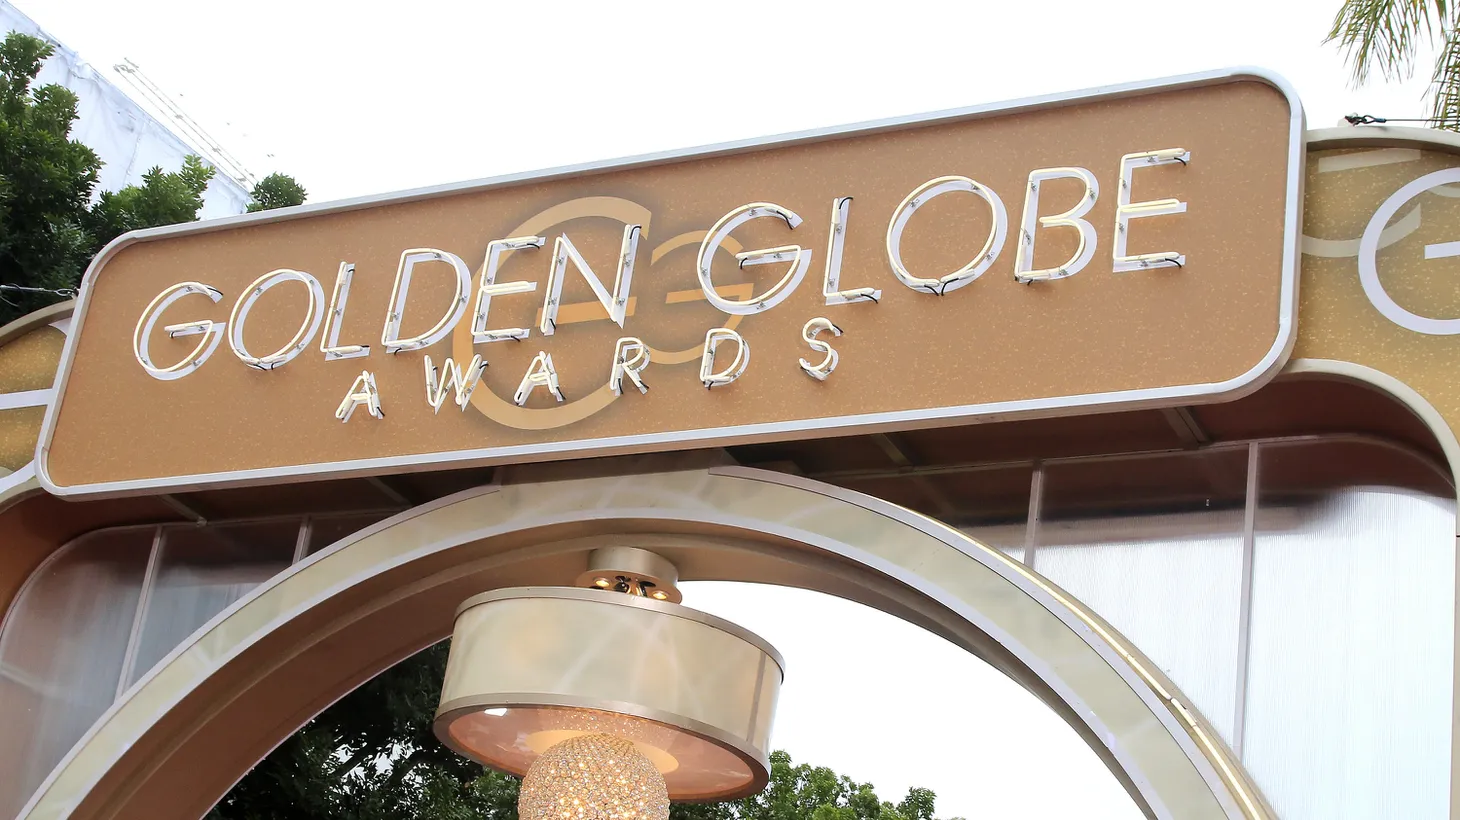 The Golden Globes will be held this Sunday at the Beverly Hilton Hotel — without an audience, host, or Hollywood stars.